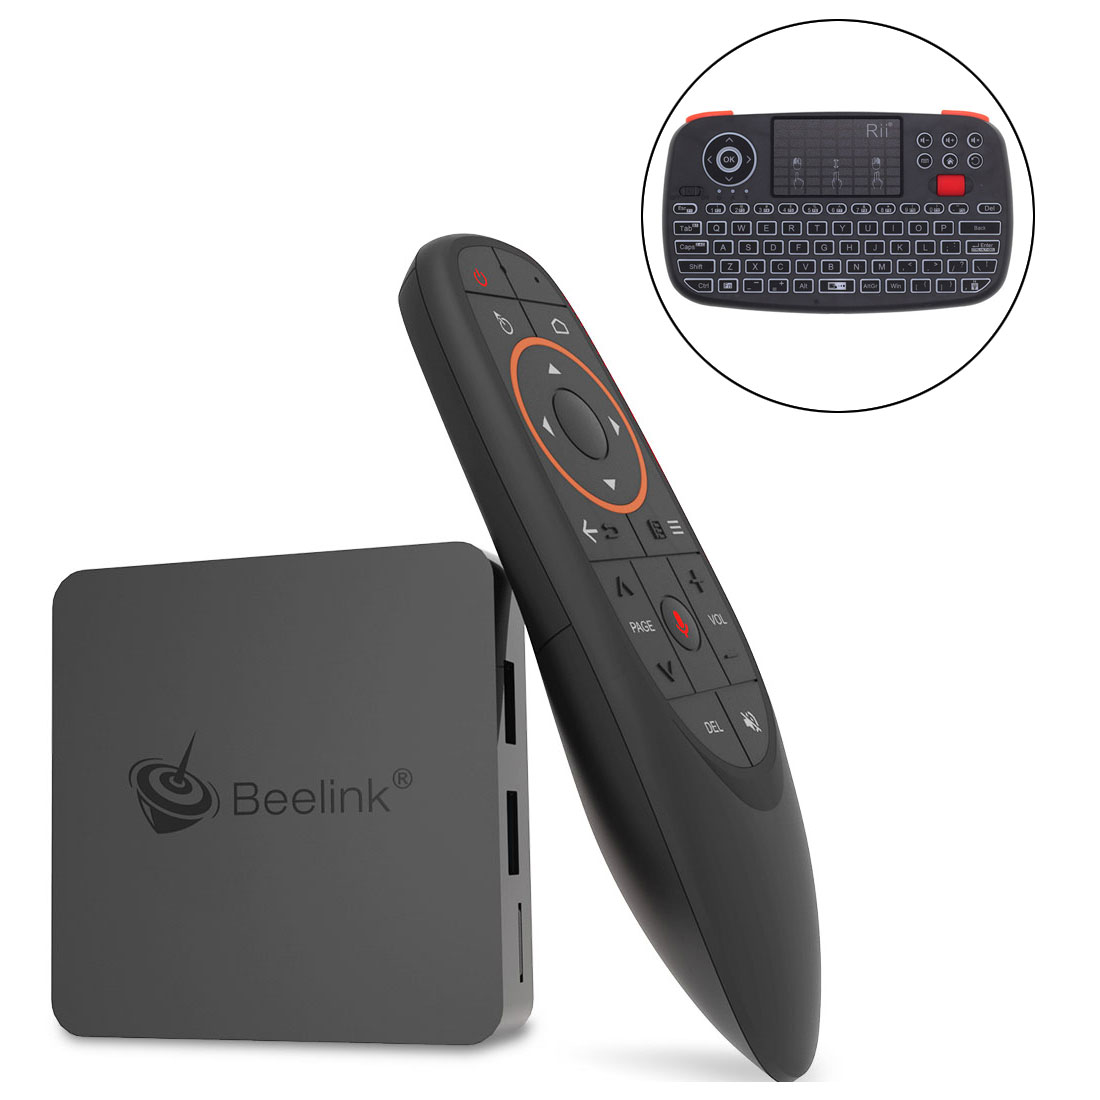 

Beelink GT MINI-A S905X2 4GB DDR4 32GB 5G WIFI bluetooth 4.0 ITV8.0 4K HDR 10 VP9 H.265 TV Box Support Voice Remote Control HD Netflix 4K Youtube with RII RT726 bluetooth 2.4G Wireless Air Mouse US